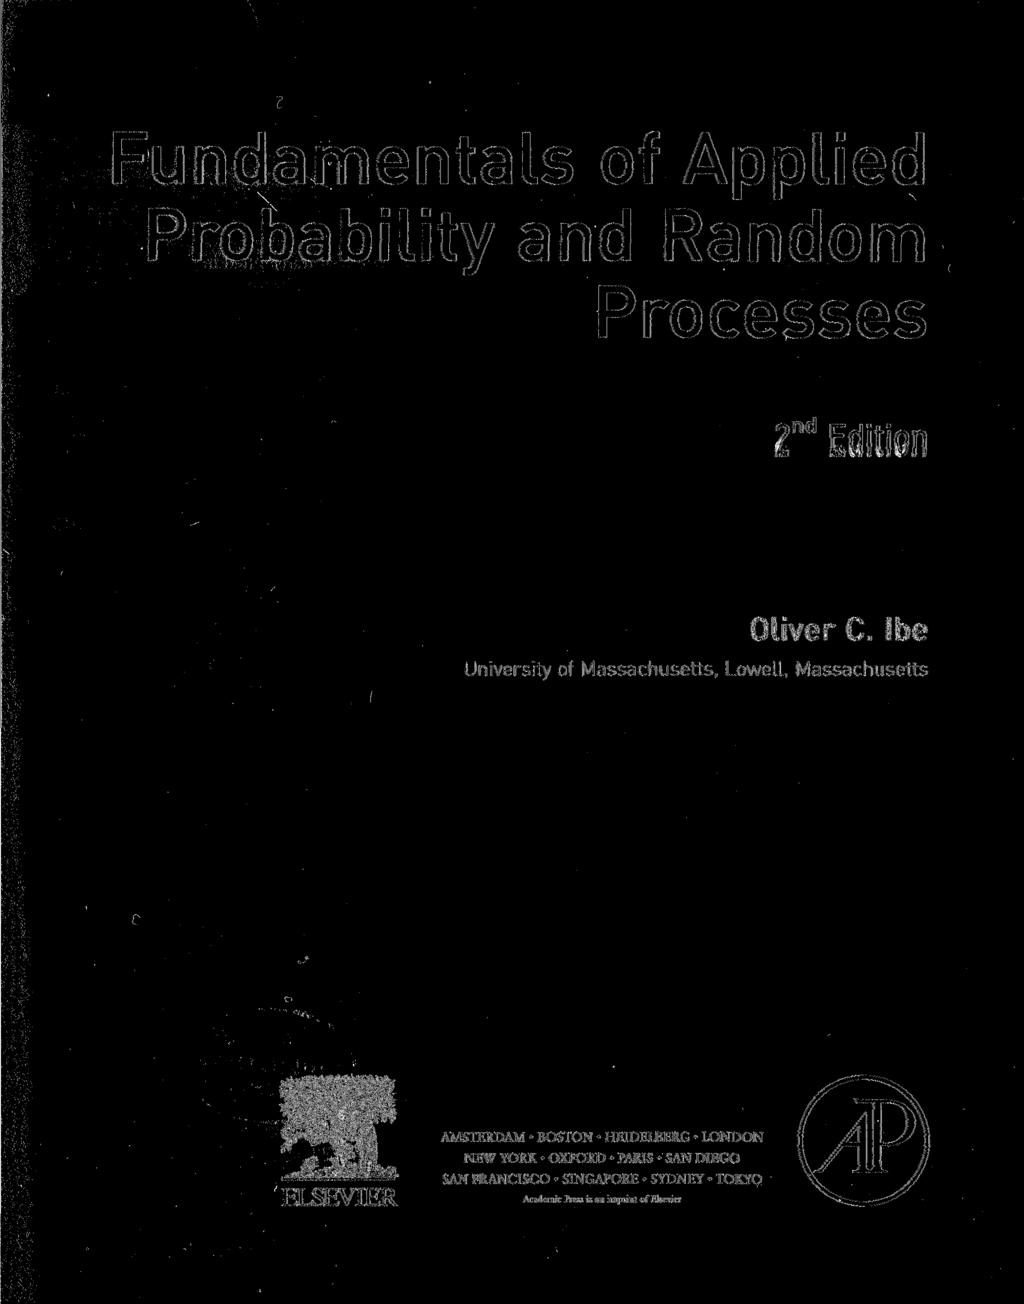 Fundamentals of Applied Probability and Random Processes,nd 2 na Edition Oliver C. Ibe University of Massachusetts, LoweLL, Massachusetts ip^ W >!